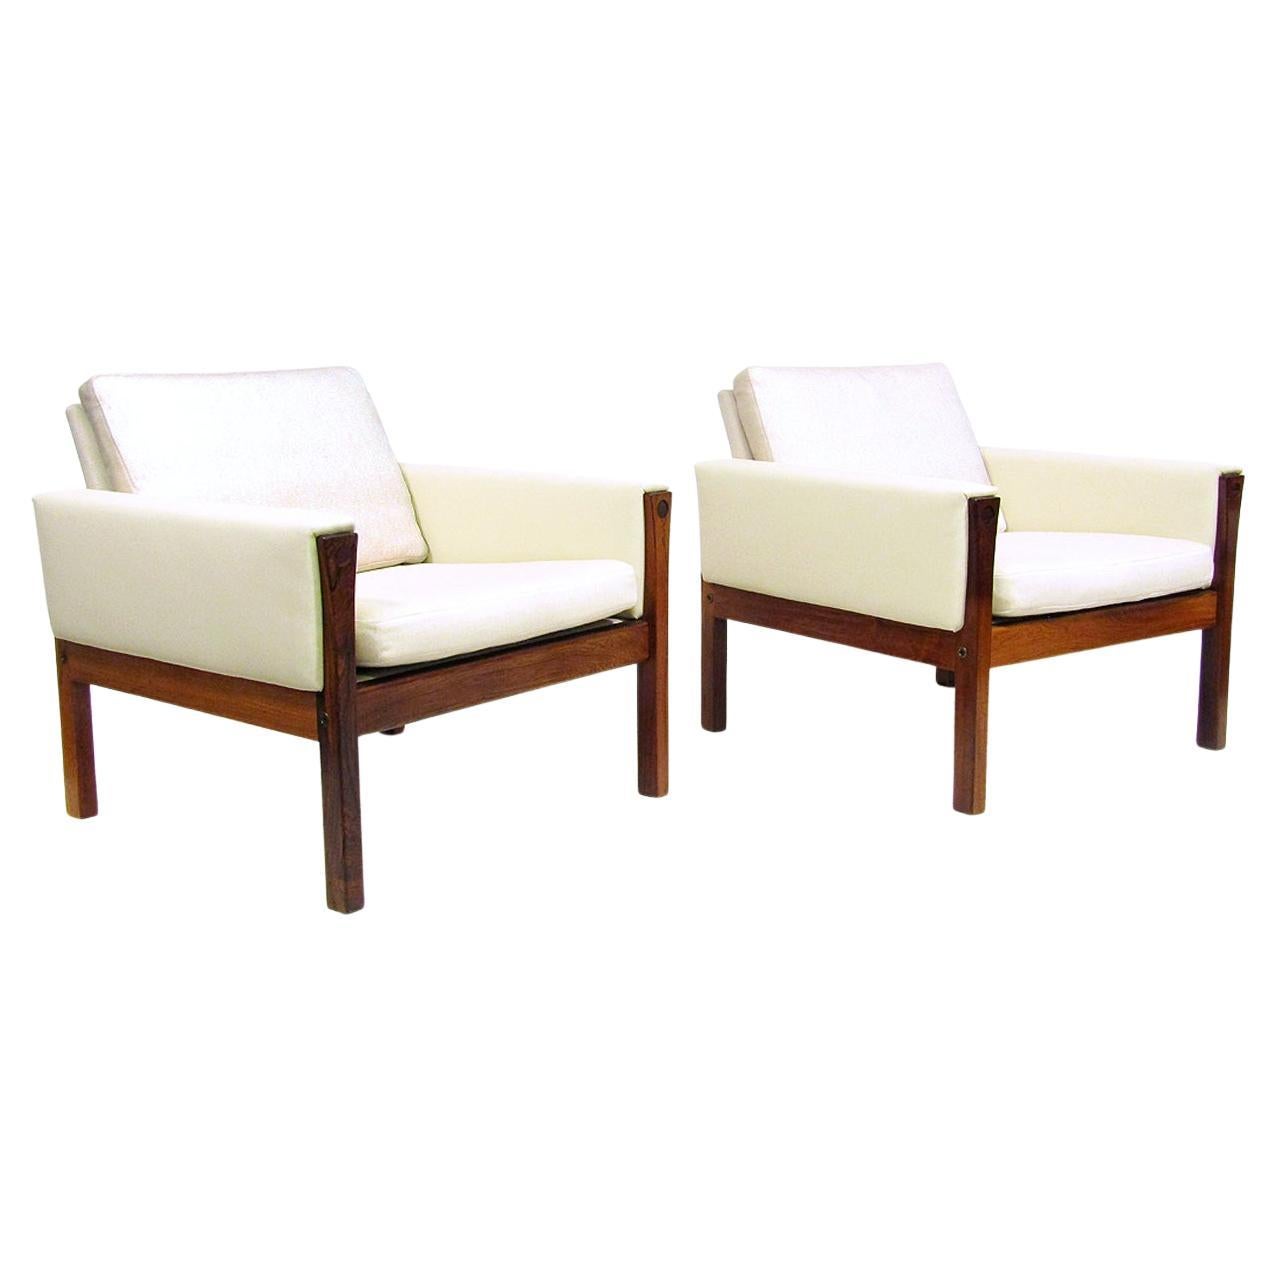 Two 1960s Danish "AP-62" Rosewood Lounge Chairs by Hans Wegner